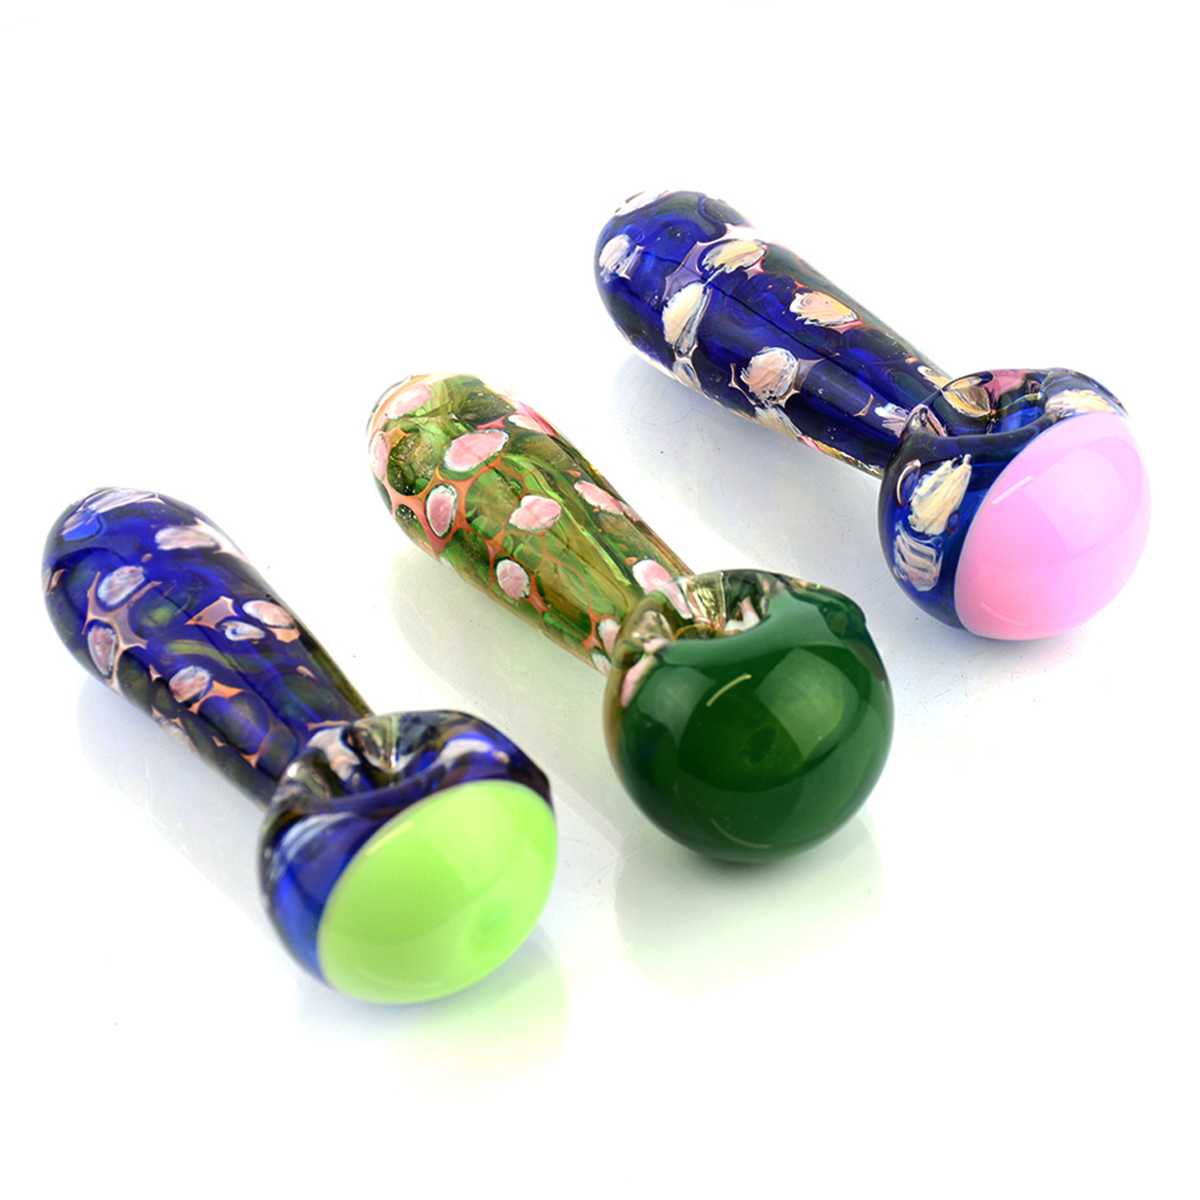 4'' Blue Bubbler Strap Hand PIPE With Slime Head